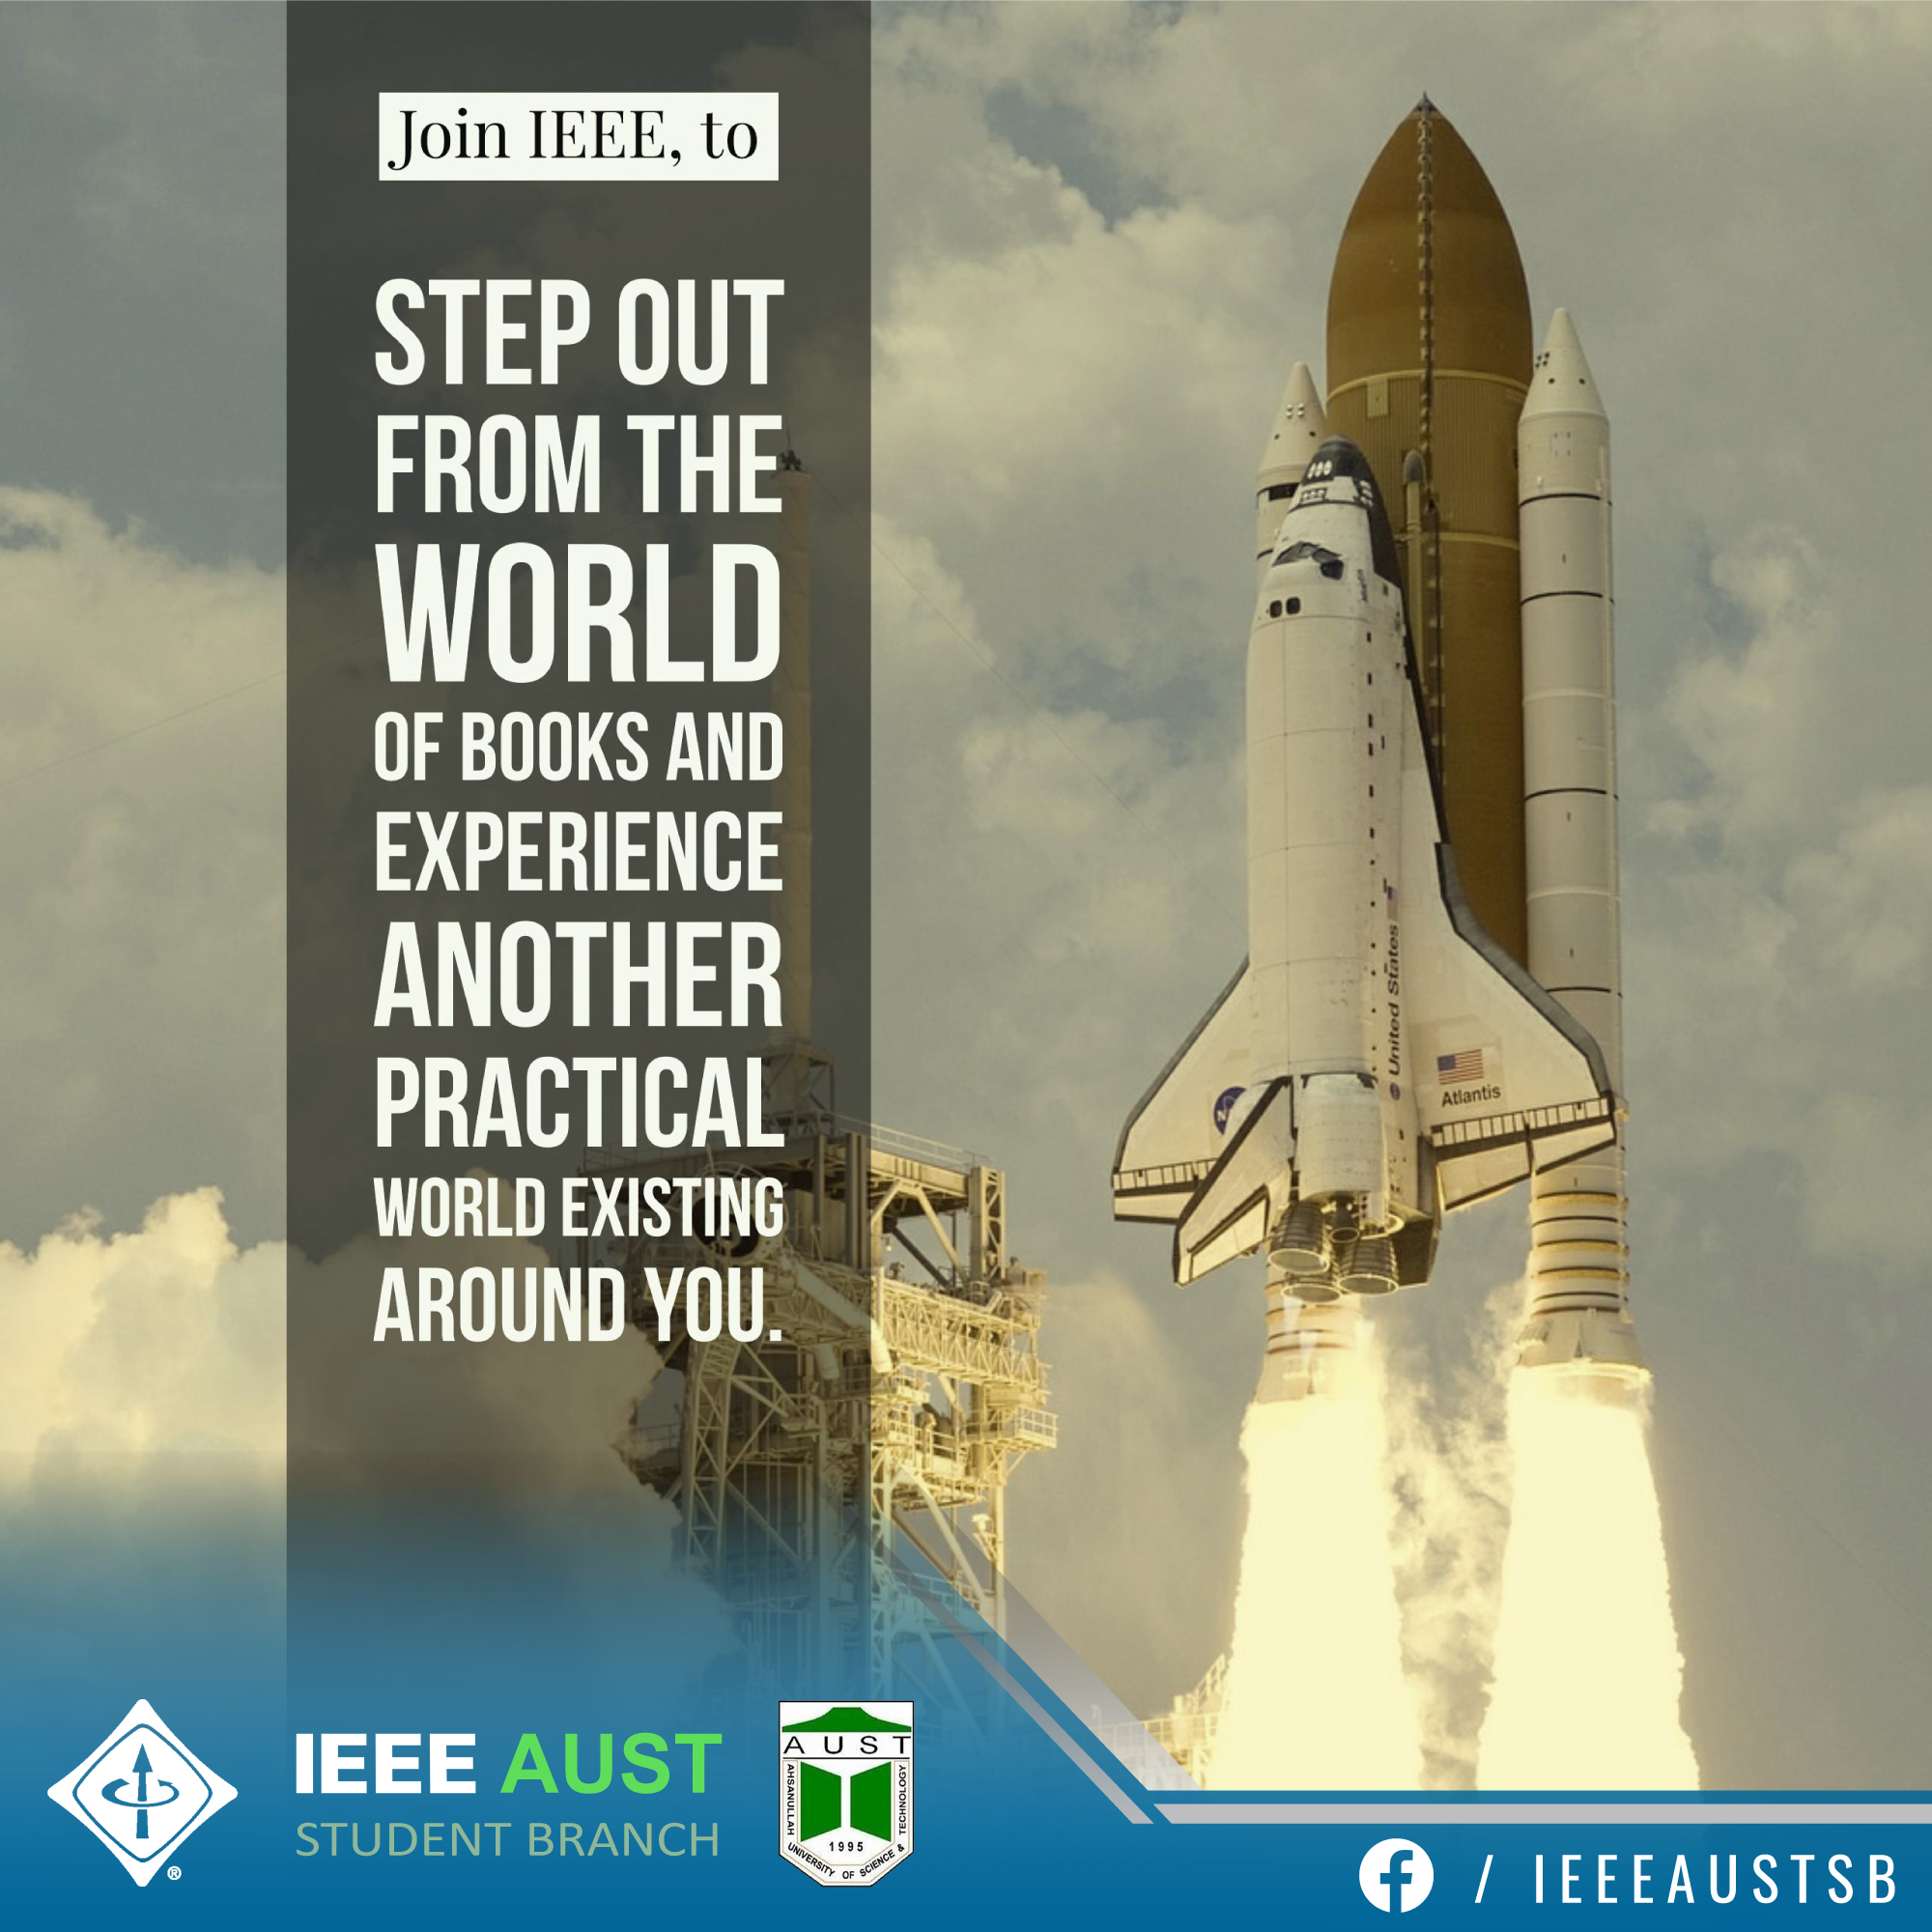 Join IEEE to step out from the world of books and experience another practical world existing around you.